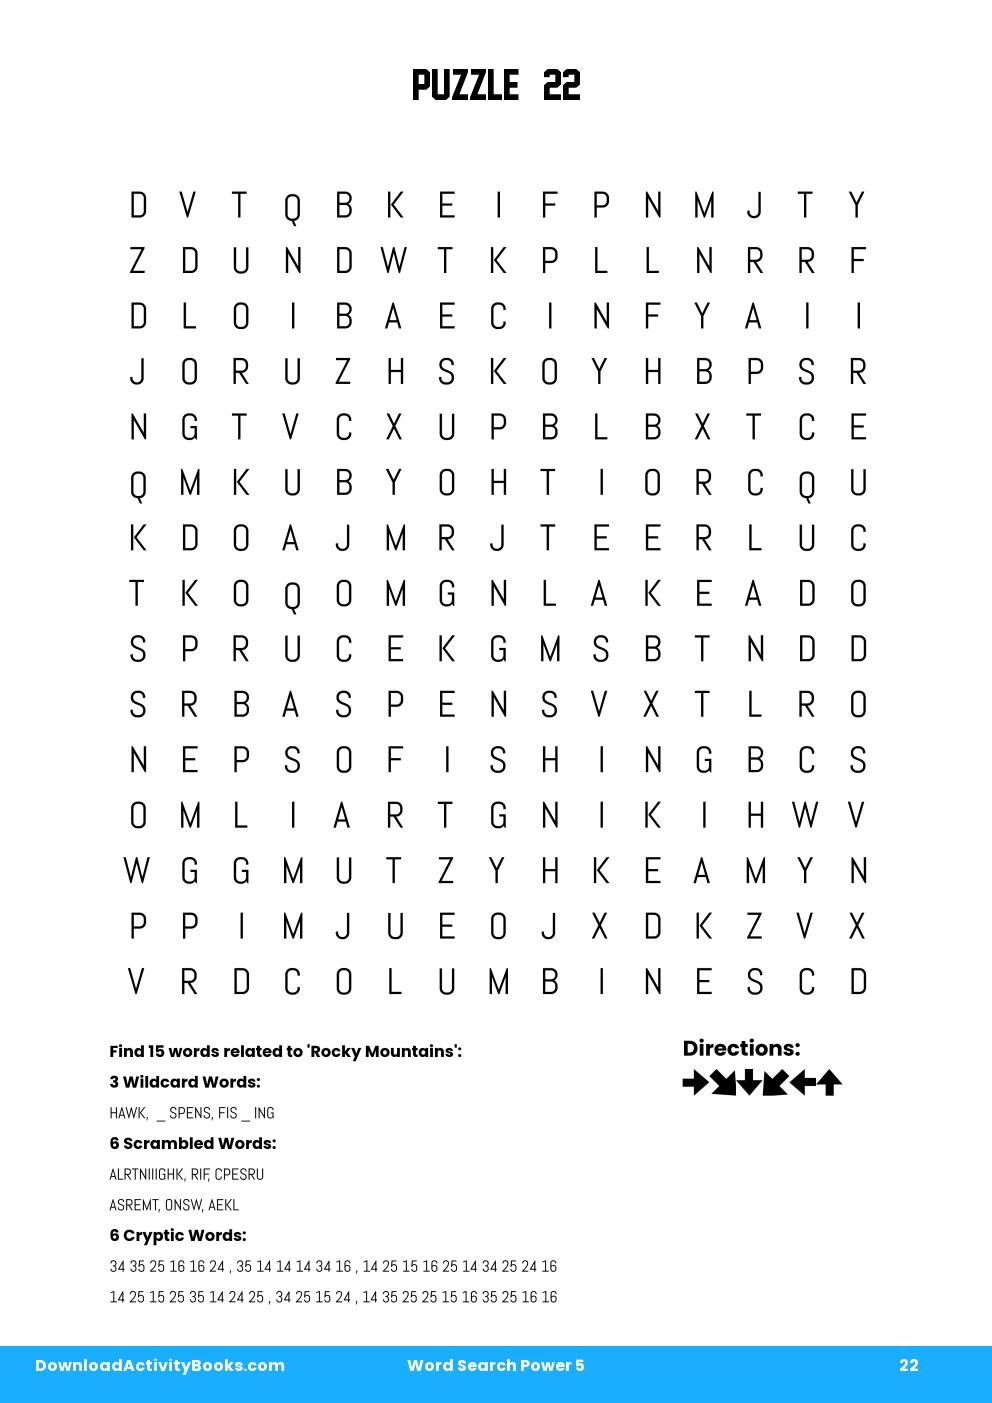 Word Search Power in Word Search Power 5